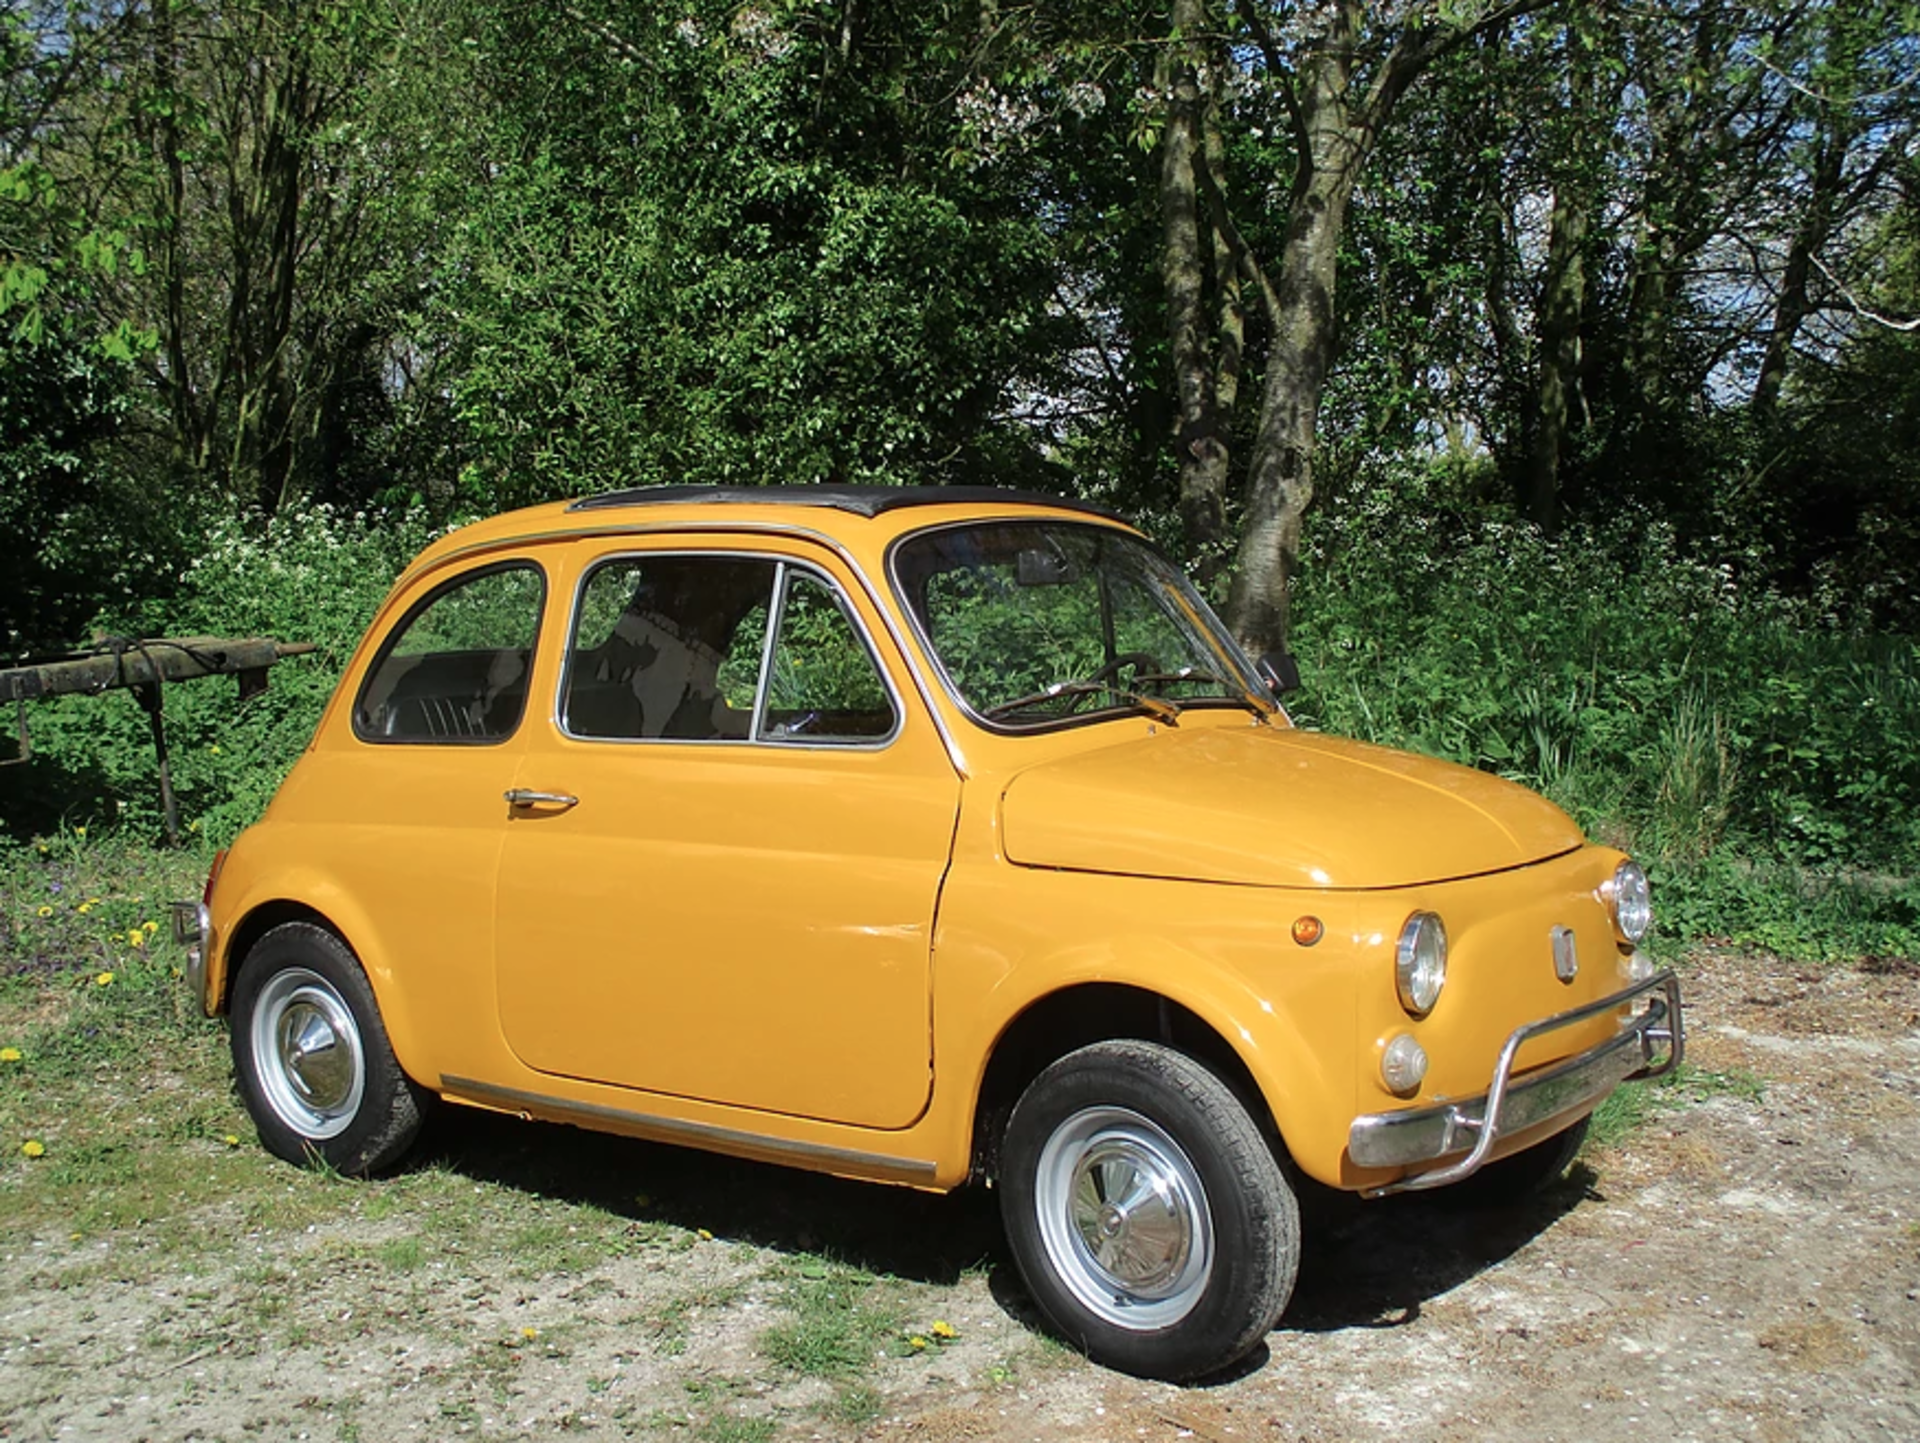 1972 FIAT 500 LUSSO - Image 2 of 17